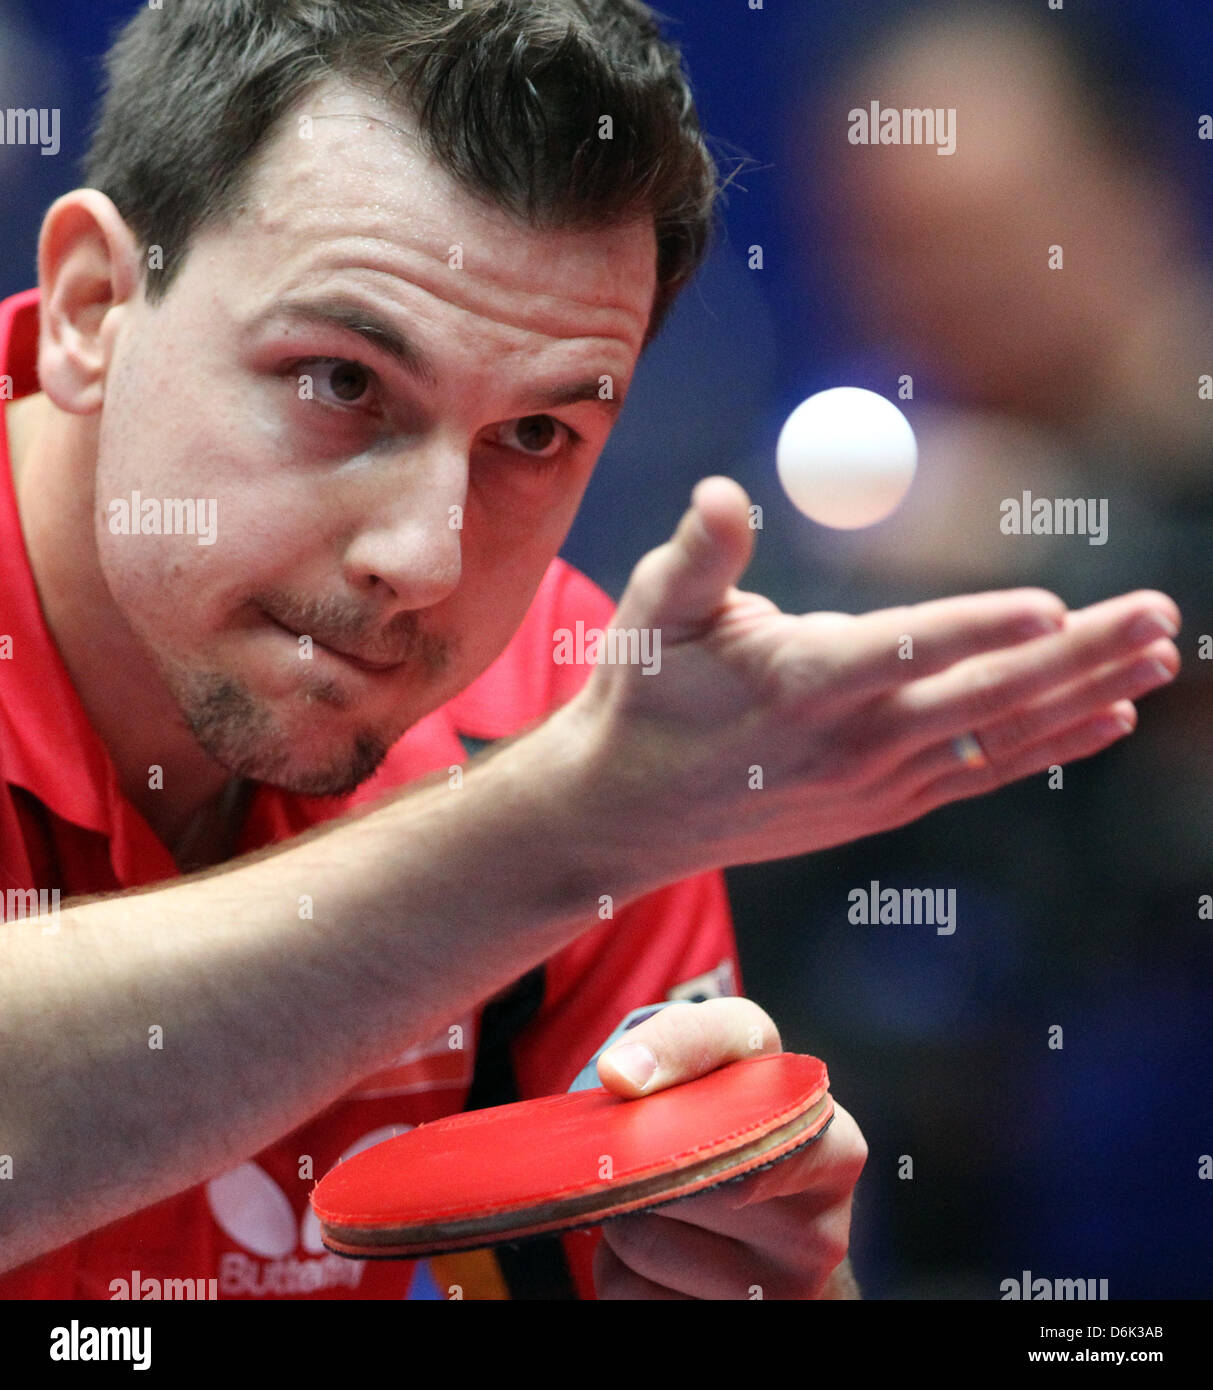 Germany's Timo Boll plays against Japan's Niwa Koki during the men's semi-final match between Japan and Germany at Westfalenhalle at the 2012 World Team Table Tennis Championships in Dortmund, Germany, 31 March 2012. Photo: FRISO GENTSCH Stock Photo